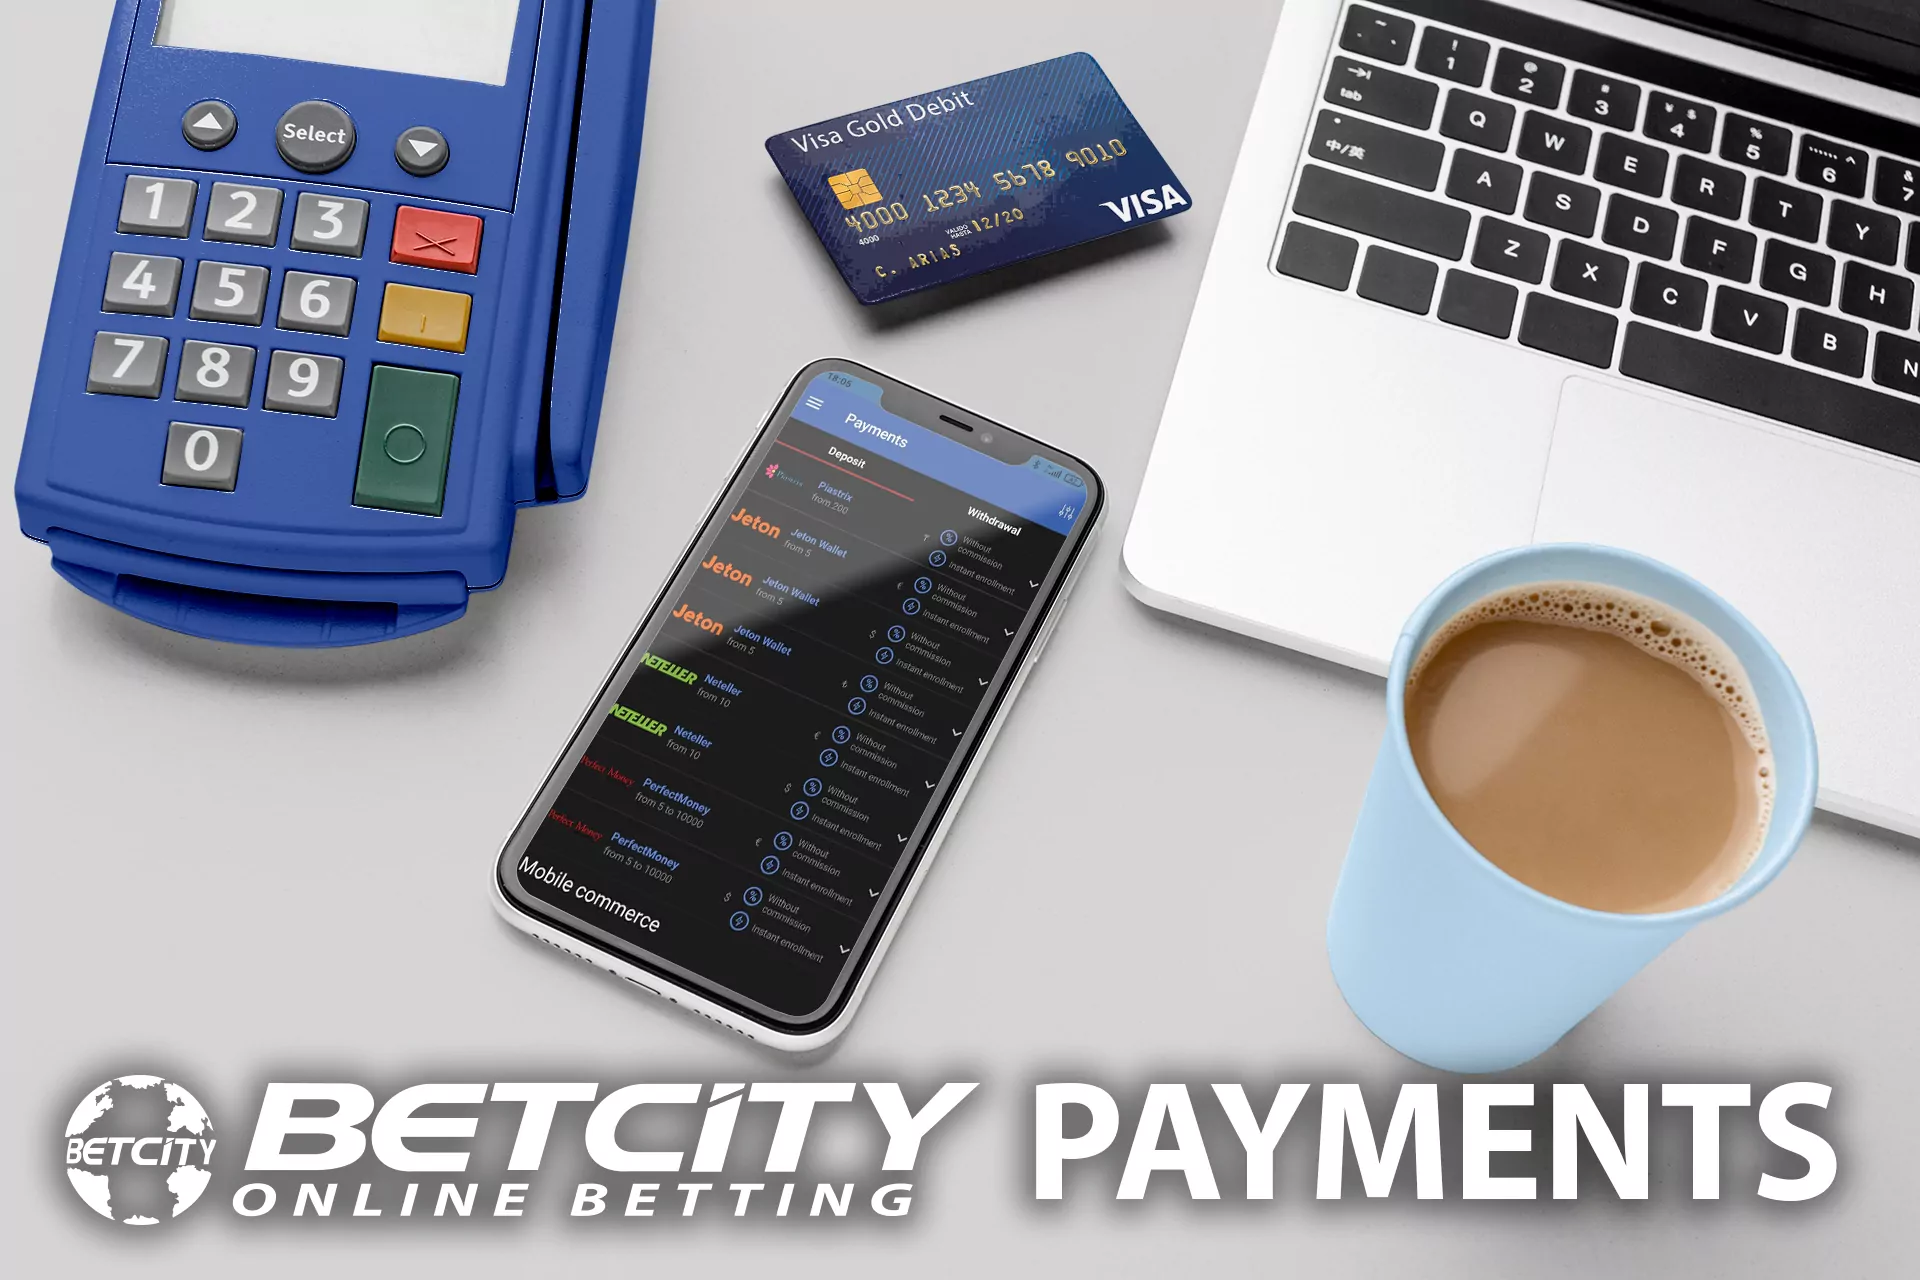 Deposit and withdrawal options are also available in the Betcity app.